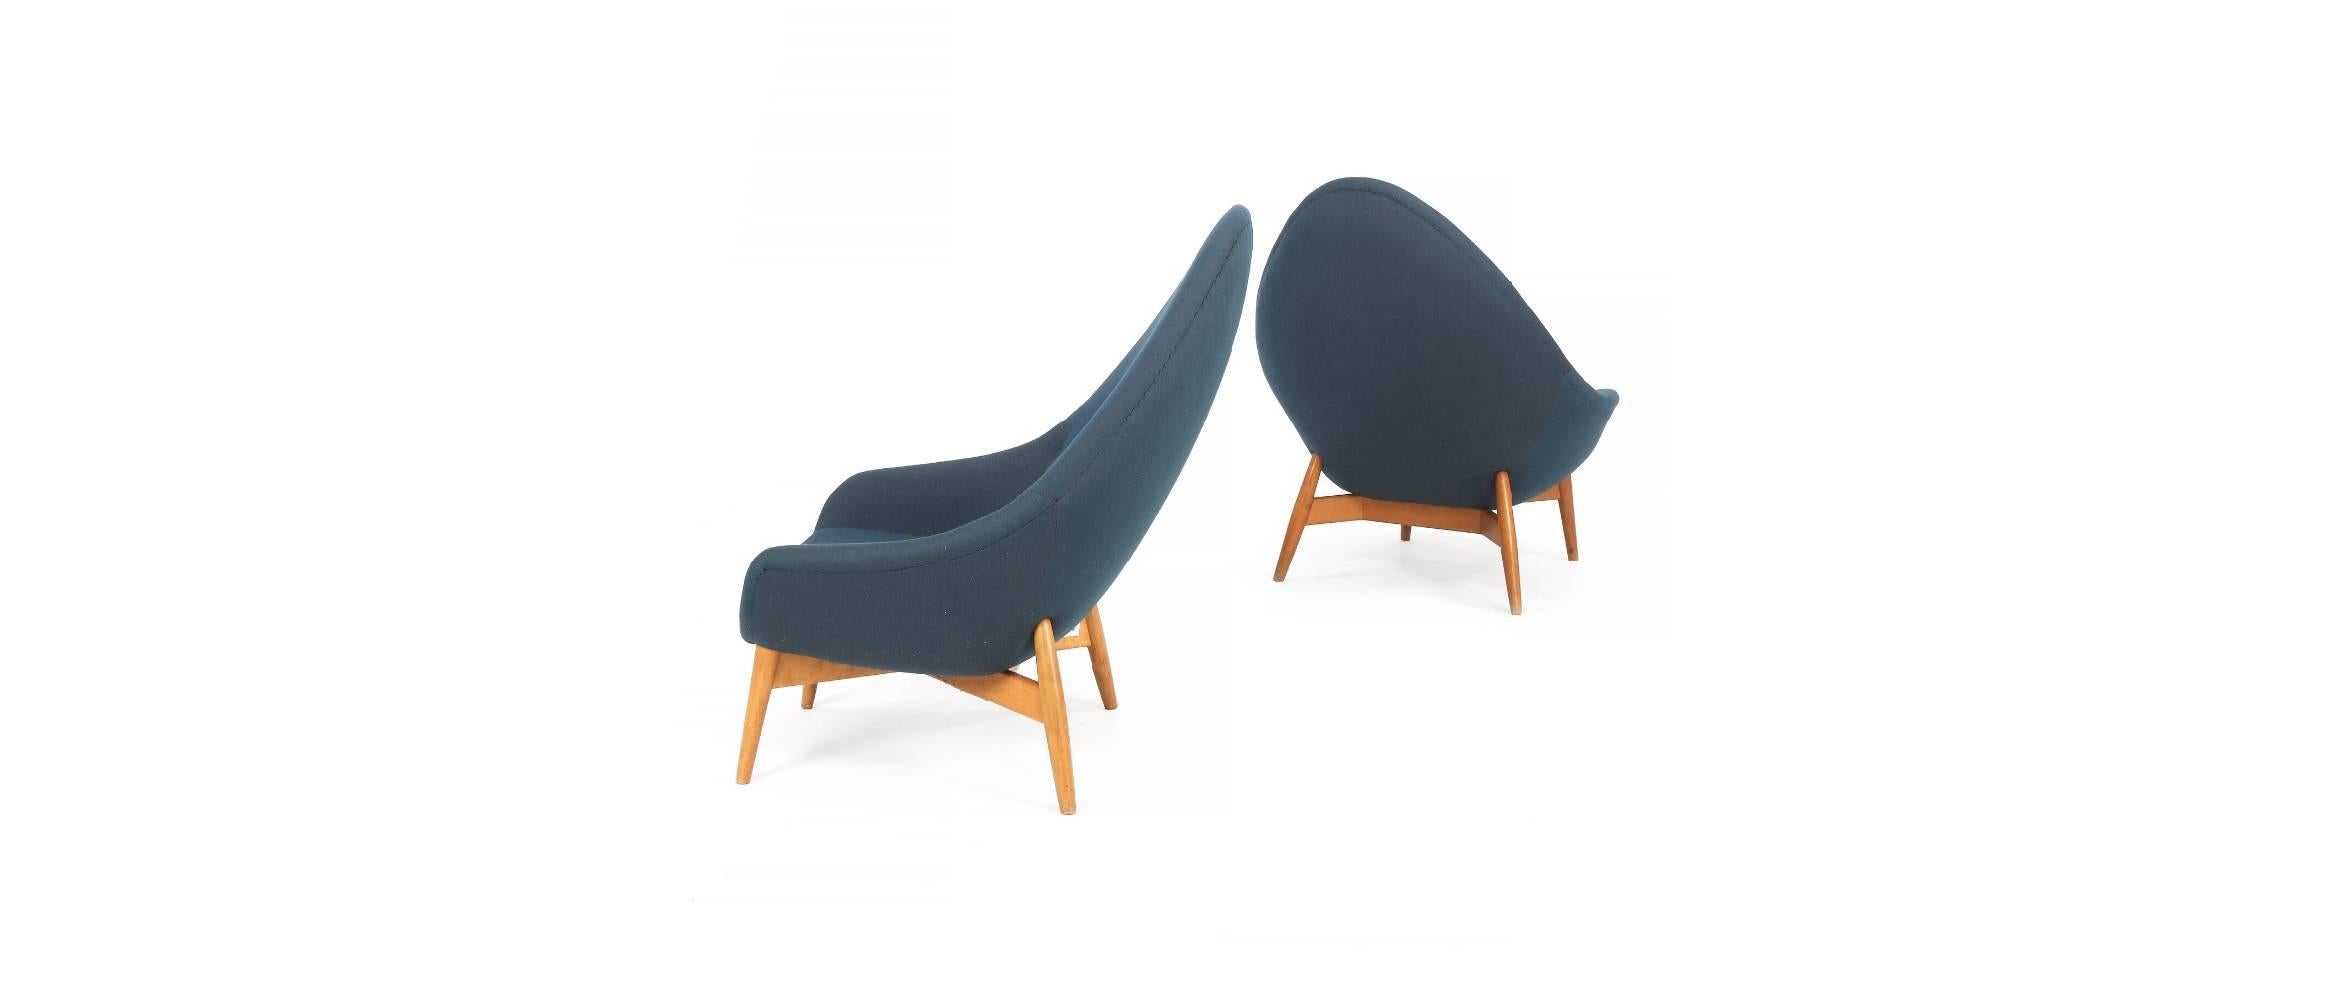 “Monk”. A pair of easy chairs with oblique beech legs and frame. Sides, back and loose seat cushion upholstered with blue wool, back fitted with buttons. These examples manufactured approx. 1950s by Keravan Puusepäntehdas/Stockmann Oy, Finland.